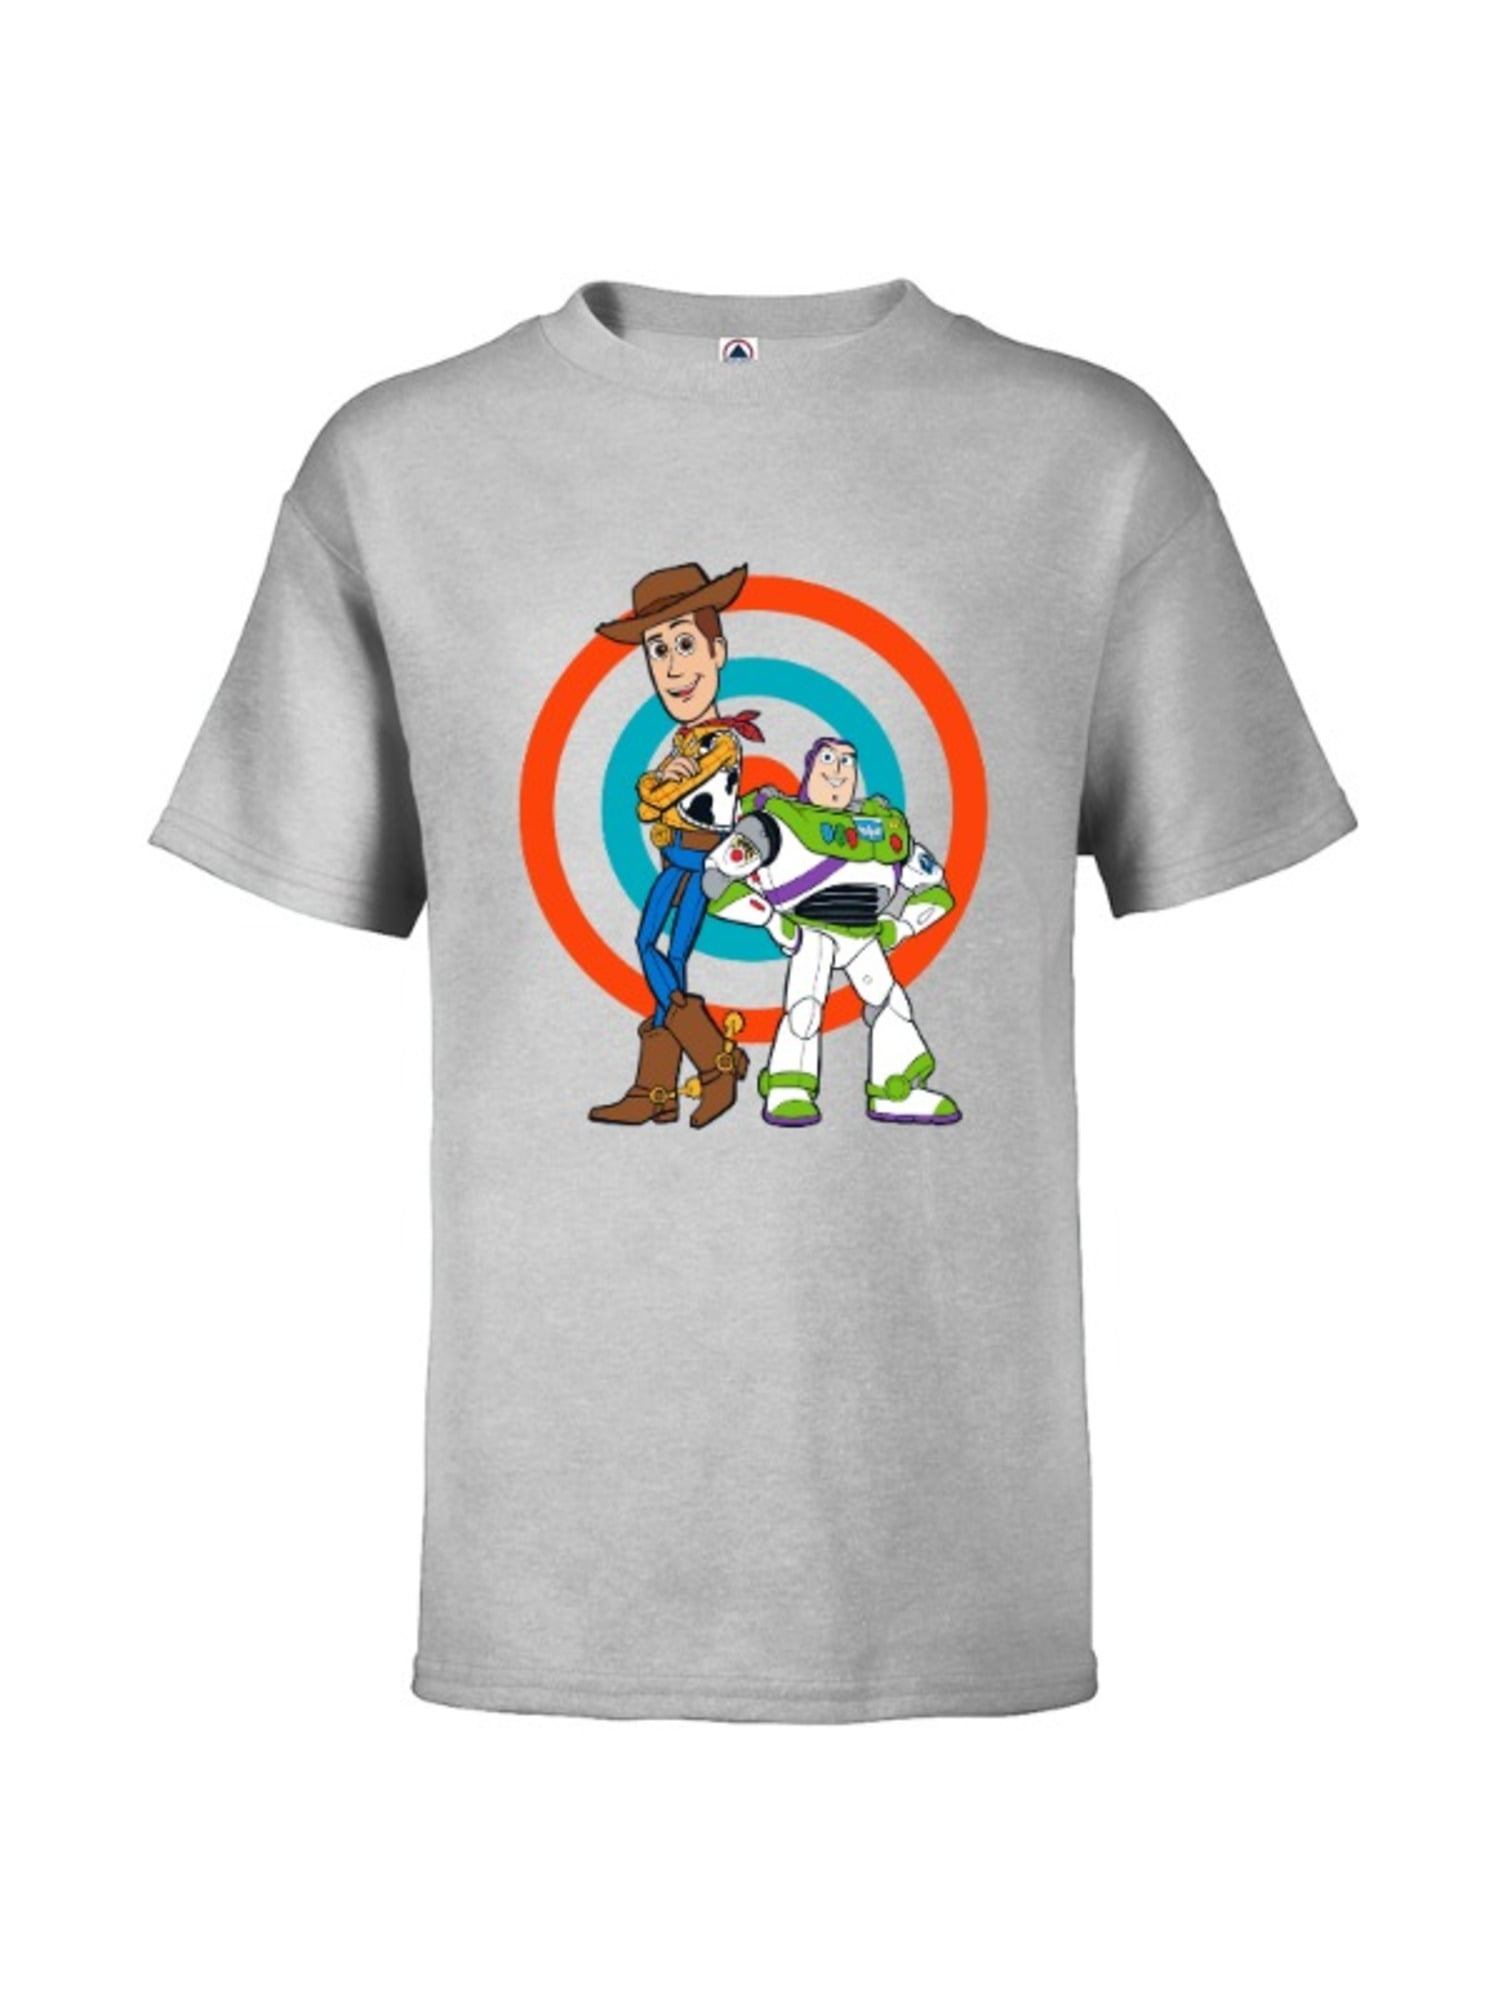 Toy Story Woody Personalised Boys Girls T-Shirt Age 7 Ideal Gift/Present